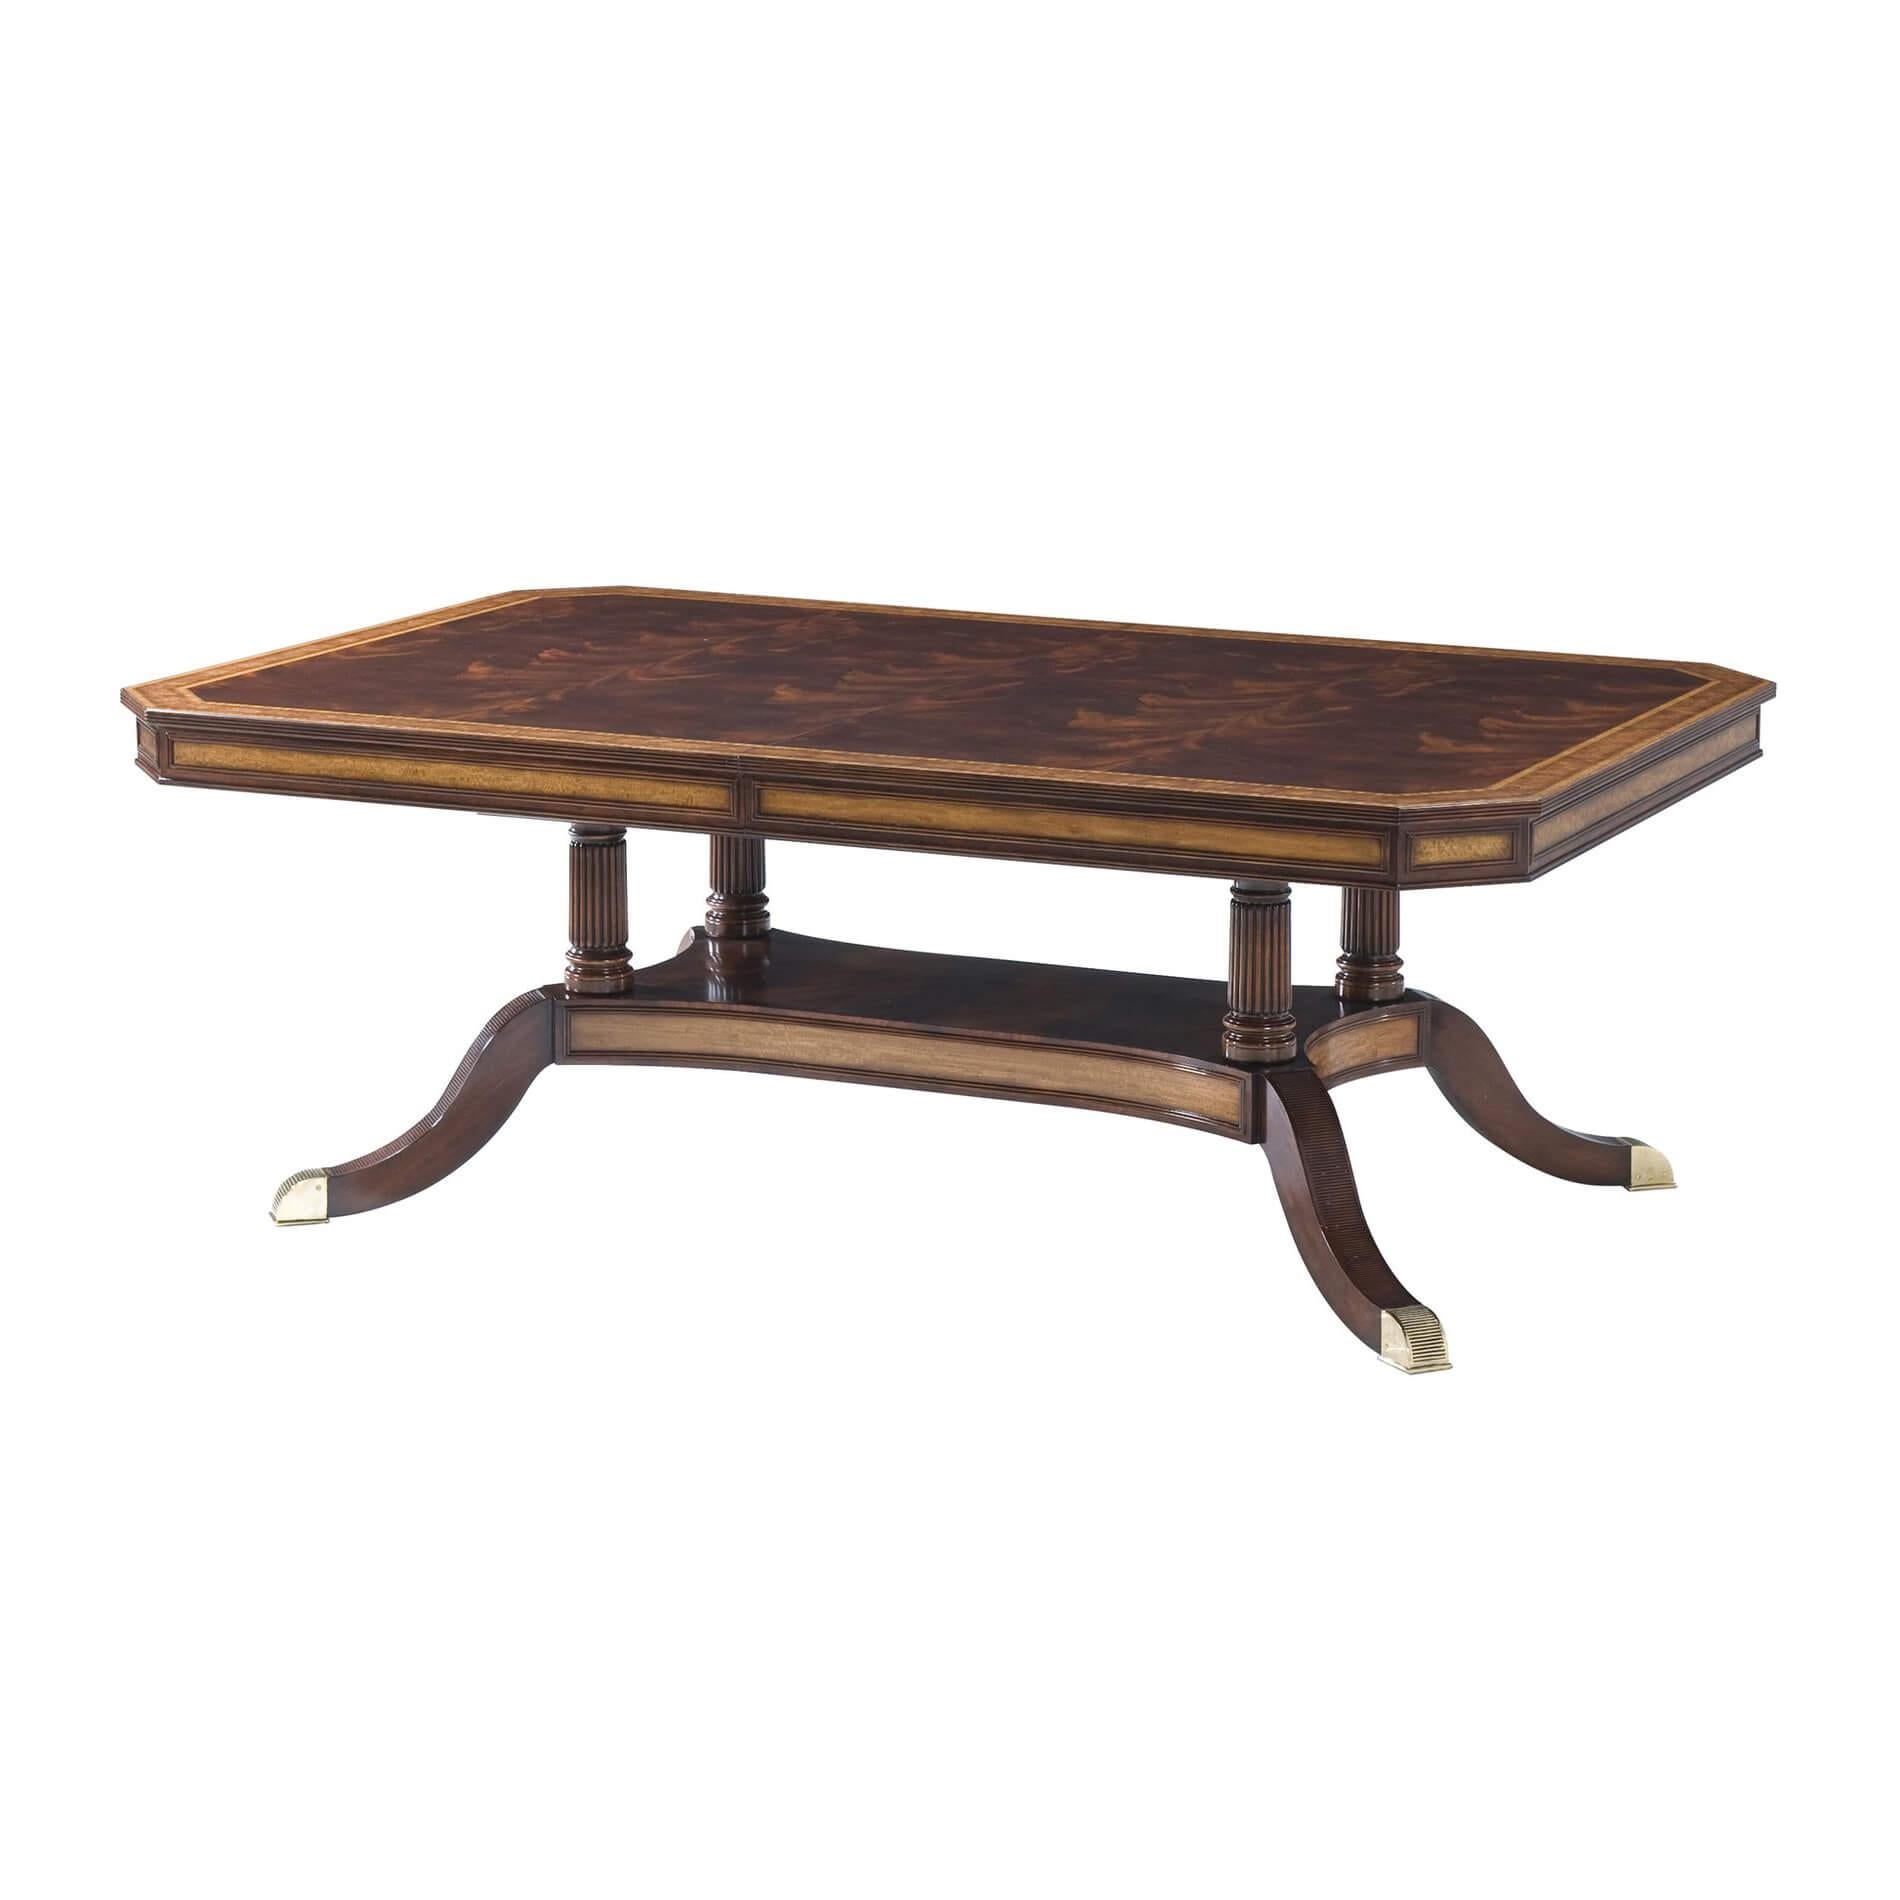 A mahogany, figured mahogany veneered and crossbanded extending dining table, the rectangular top opening to accommodate two additional self-storing leaves, the paneled satinwood veneered frieze above a bold base of four turned reeded columns on a